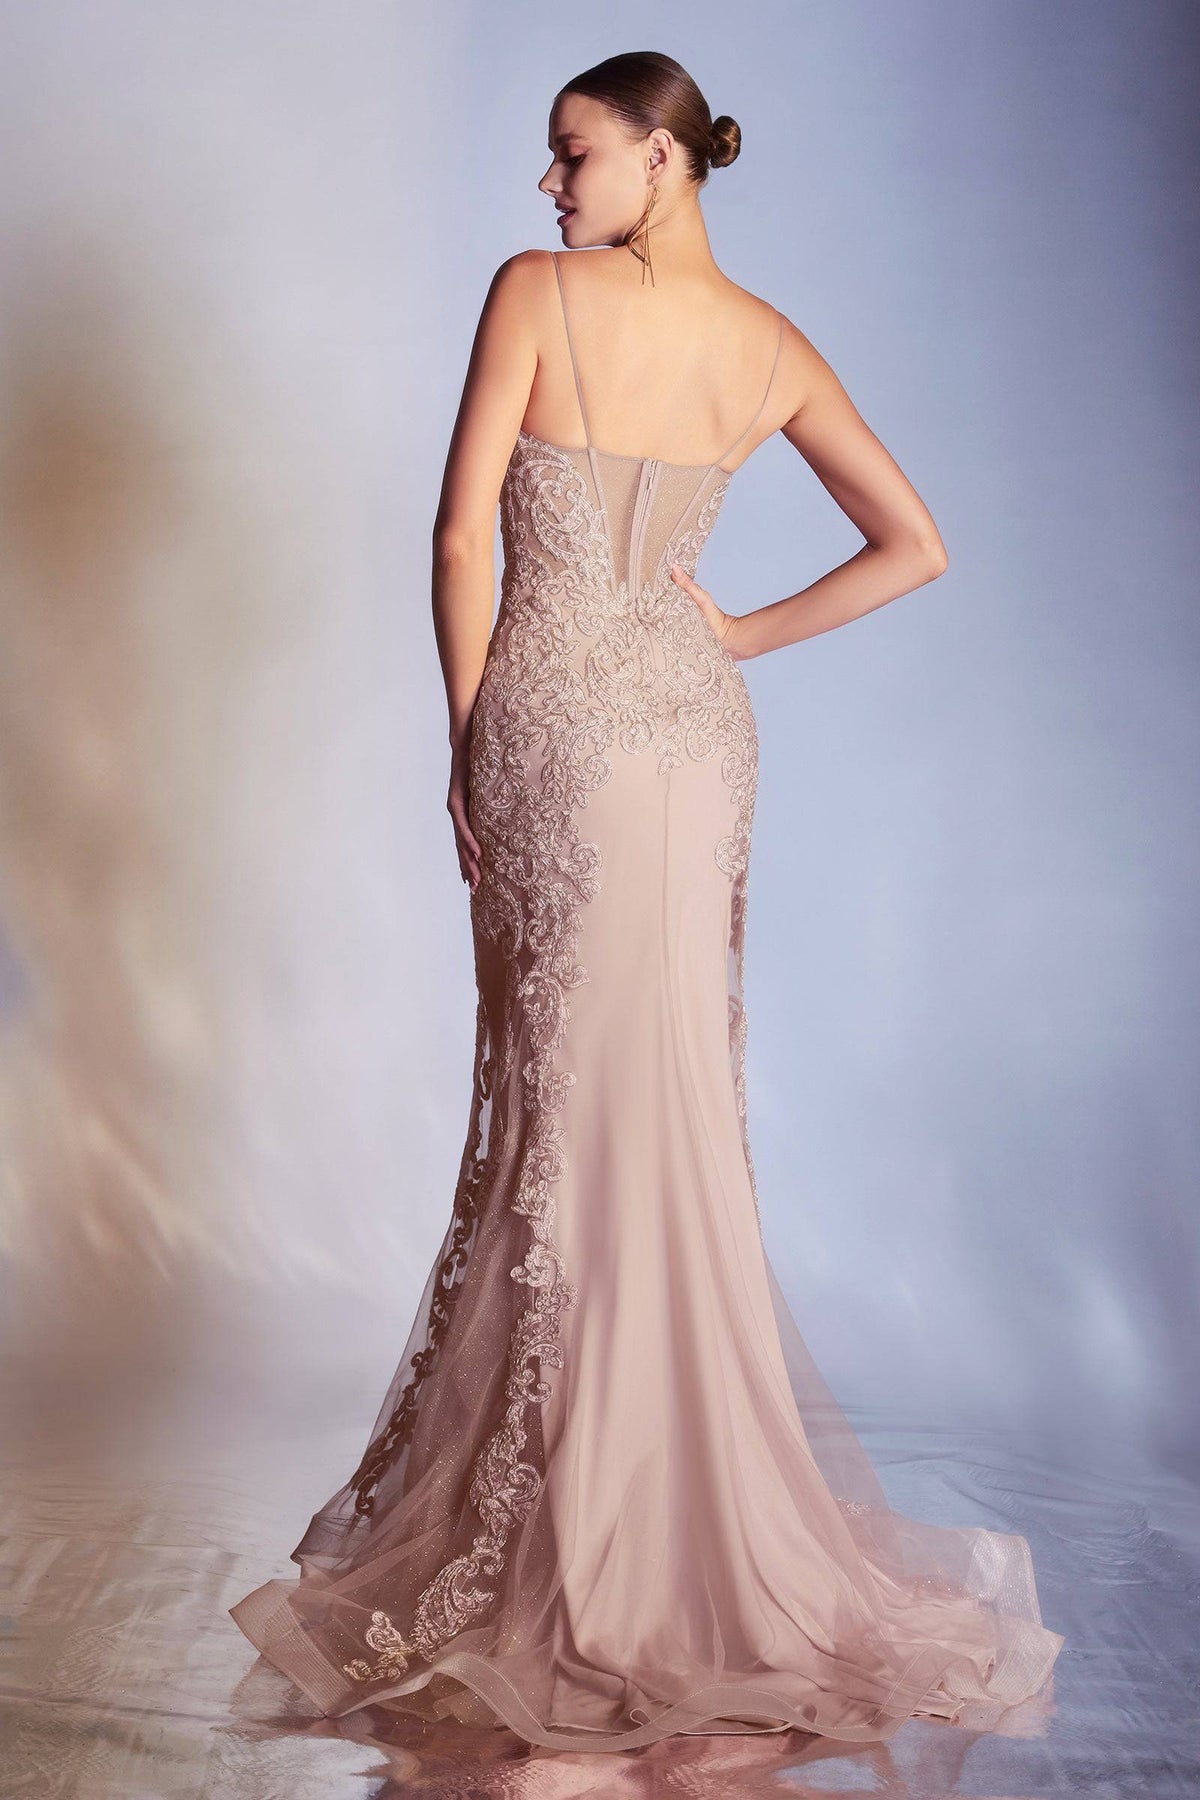 Elegant Mermaid Style Gown with Embroidered Bodice and Deep Neckline #CDCD945 - NORMA REED